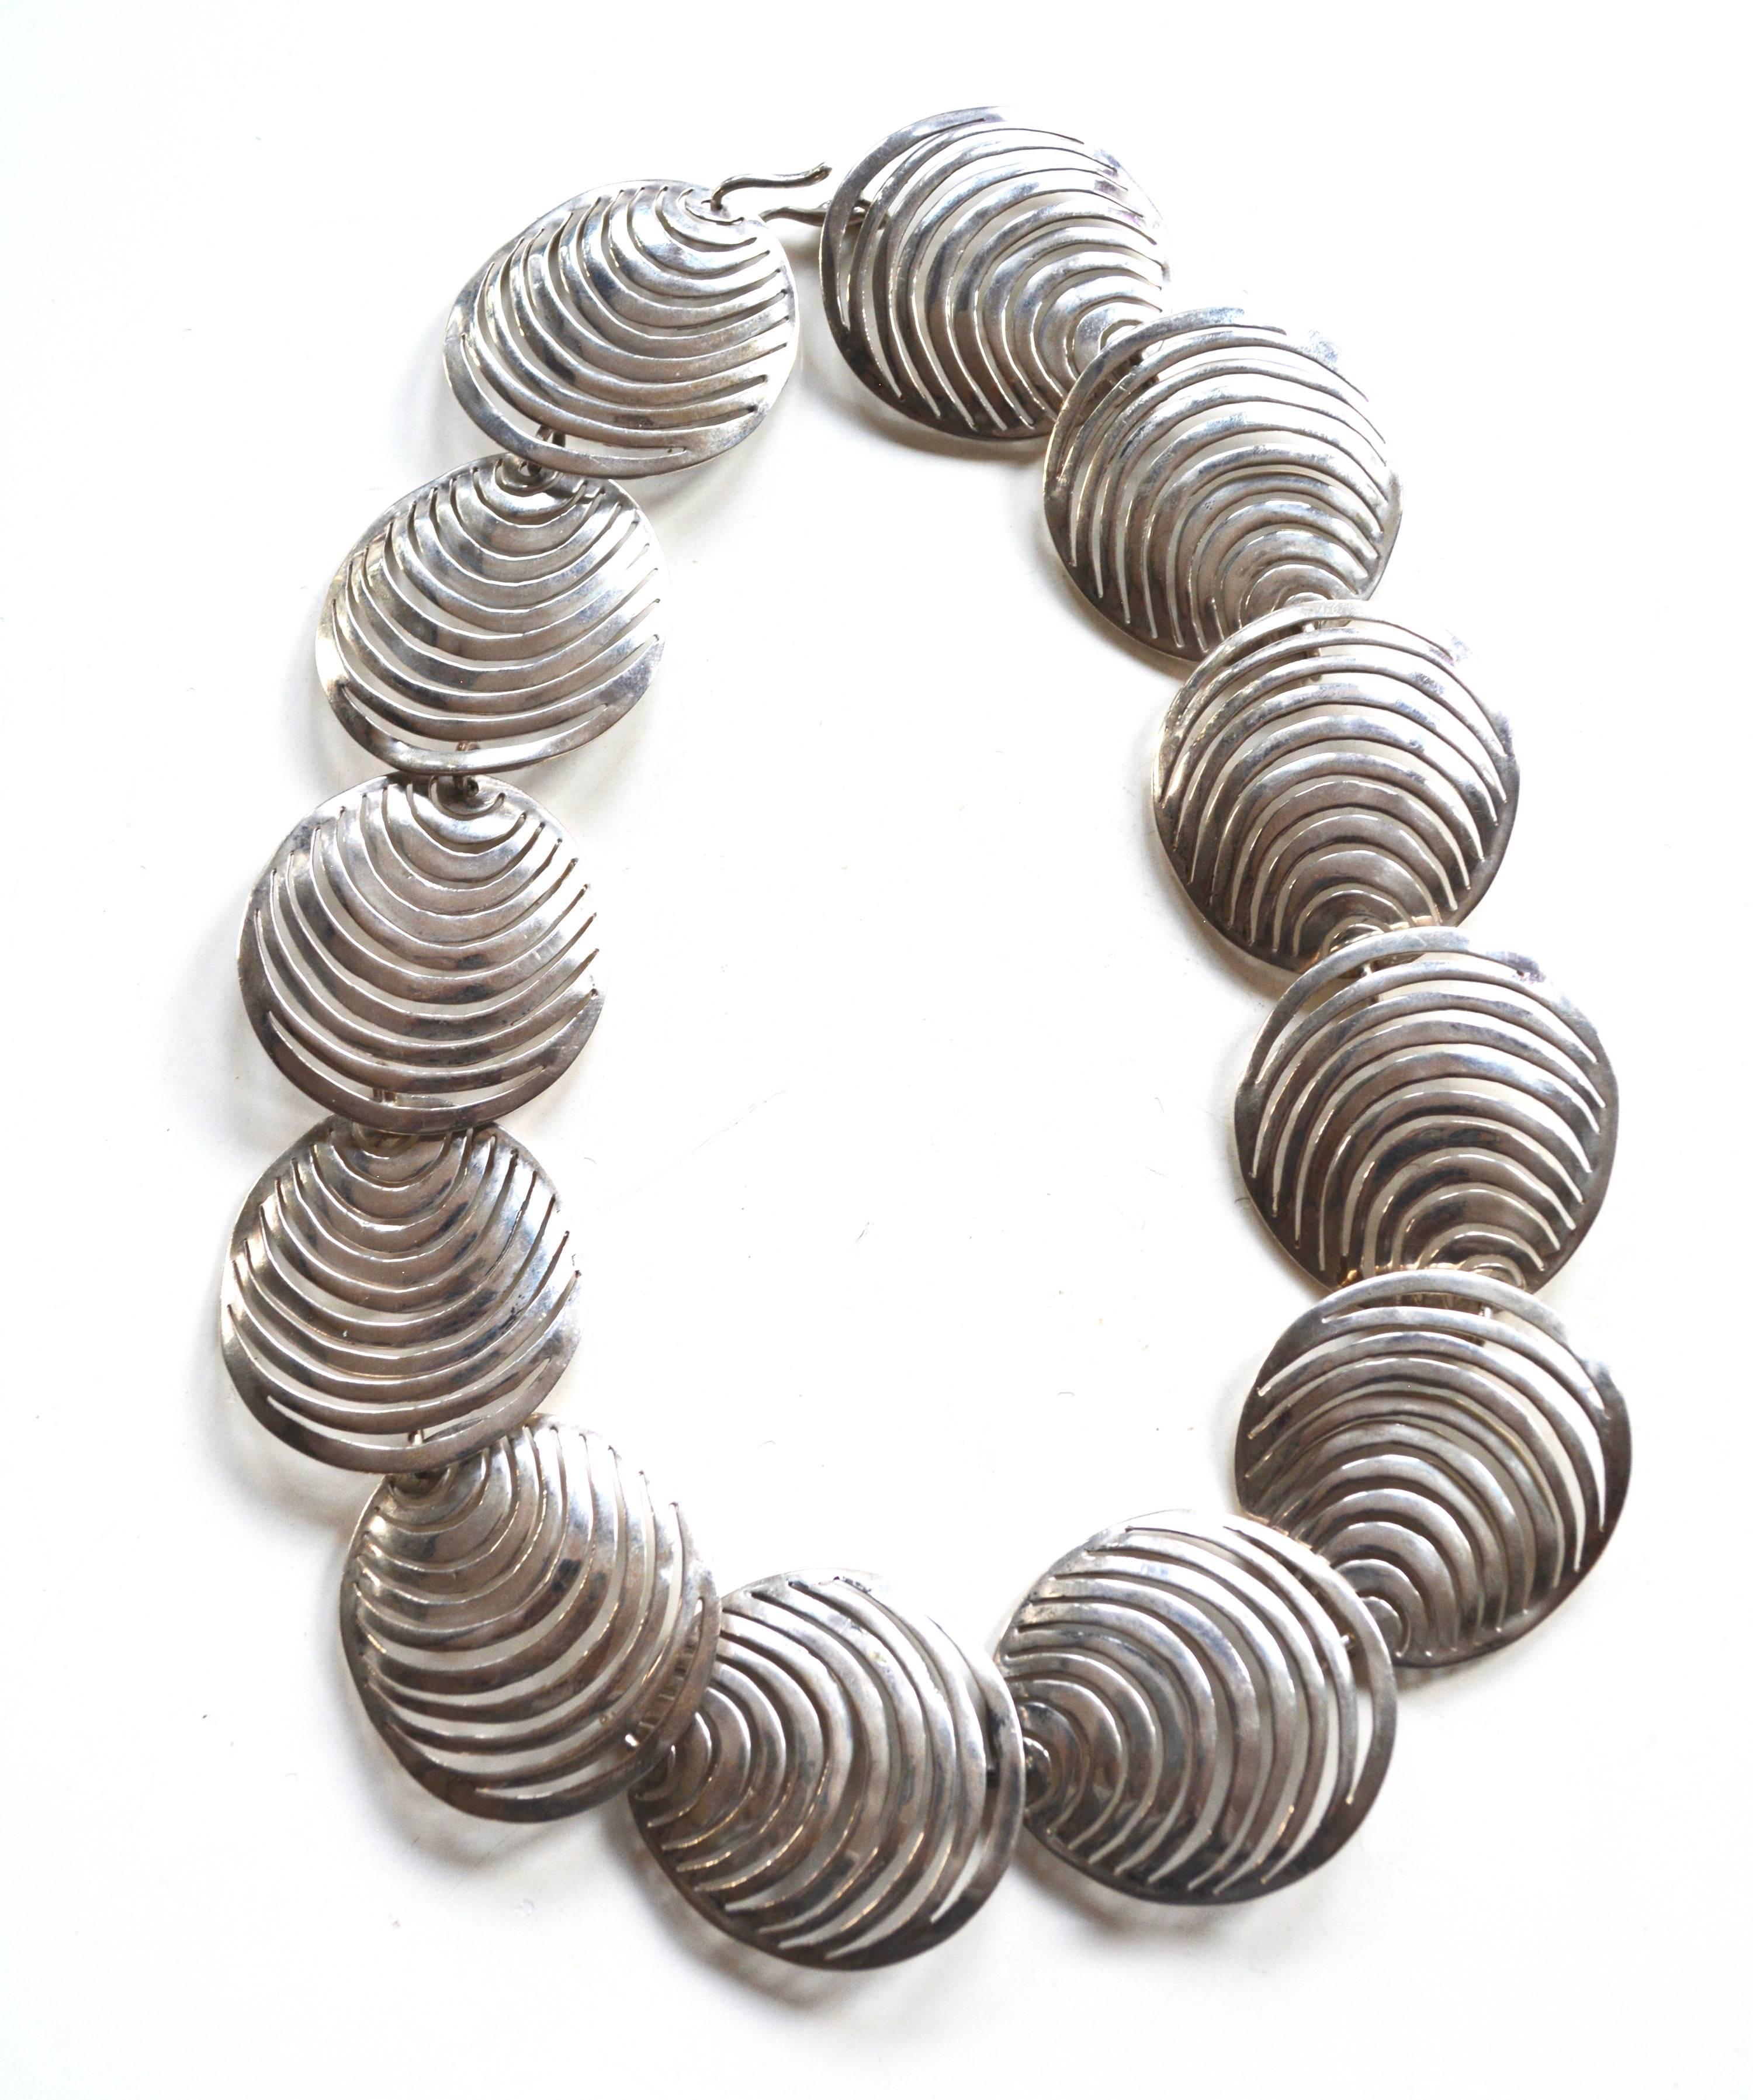 Vintage handmade 1970s sterling tested necklace. Features 1.5" wide abstract geometric links and simple hook closure. Total length is about 18.5" long. 